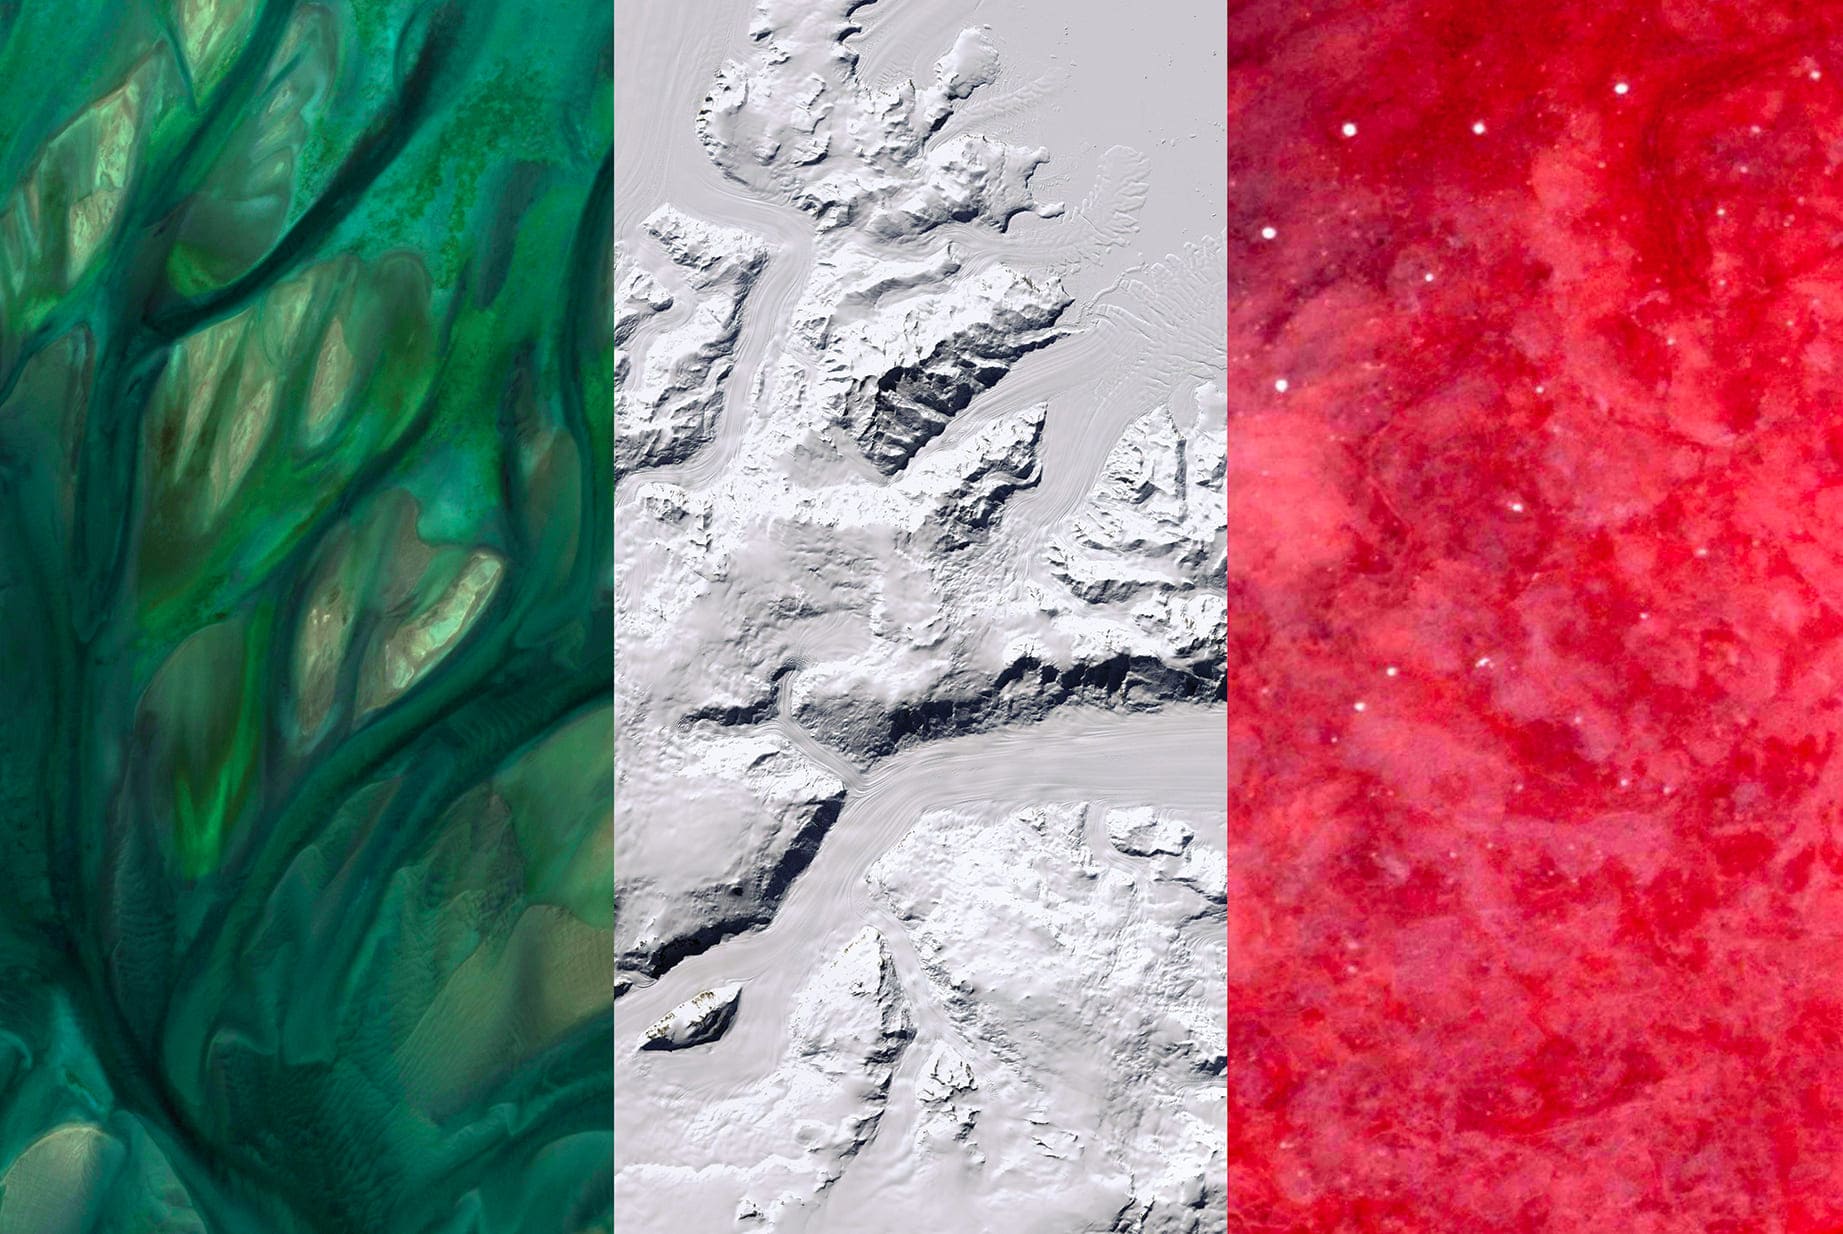 ITALY EARTH FLAG, 2016, DIGITAL COLLAGE OF SATELLITE PHOTOGRAPHY FROM QATAR, ANTARCTICA, NAMIBIA, diasec print CM 67×100, edition of 9